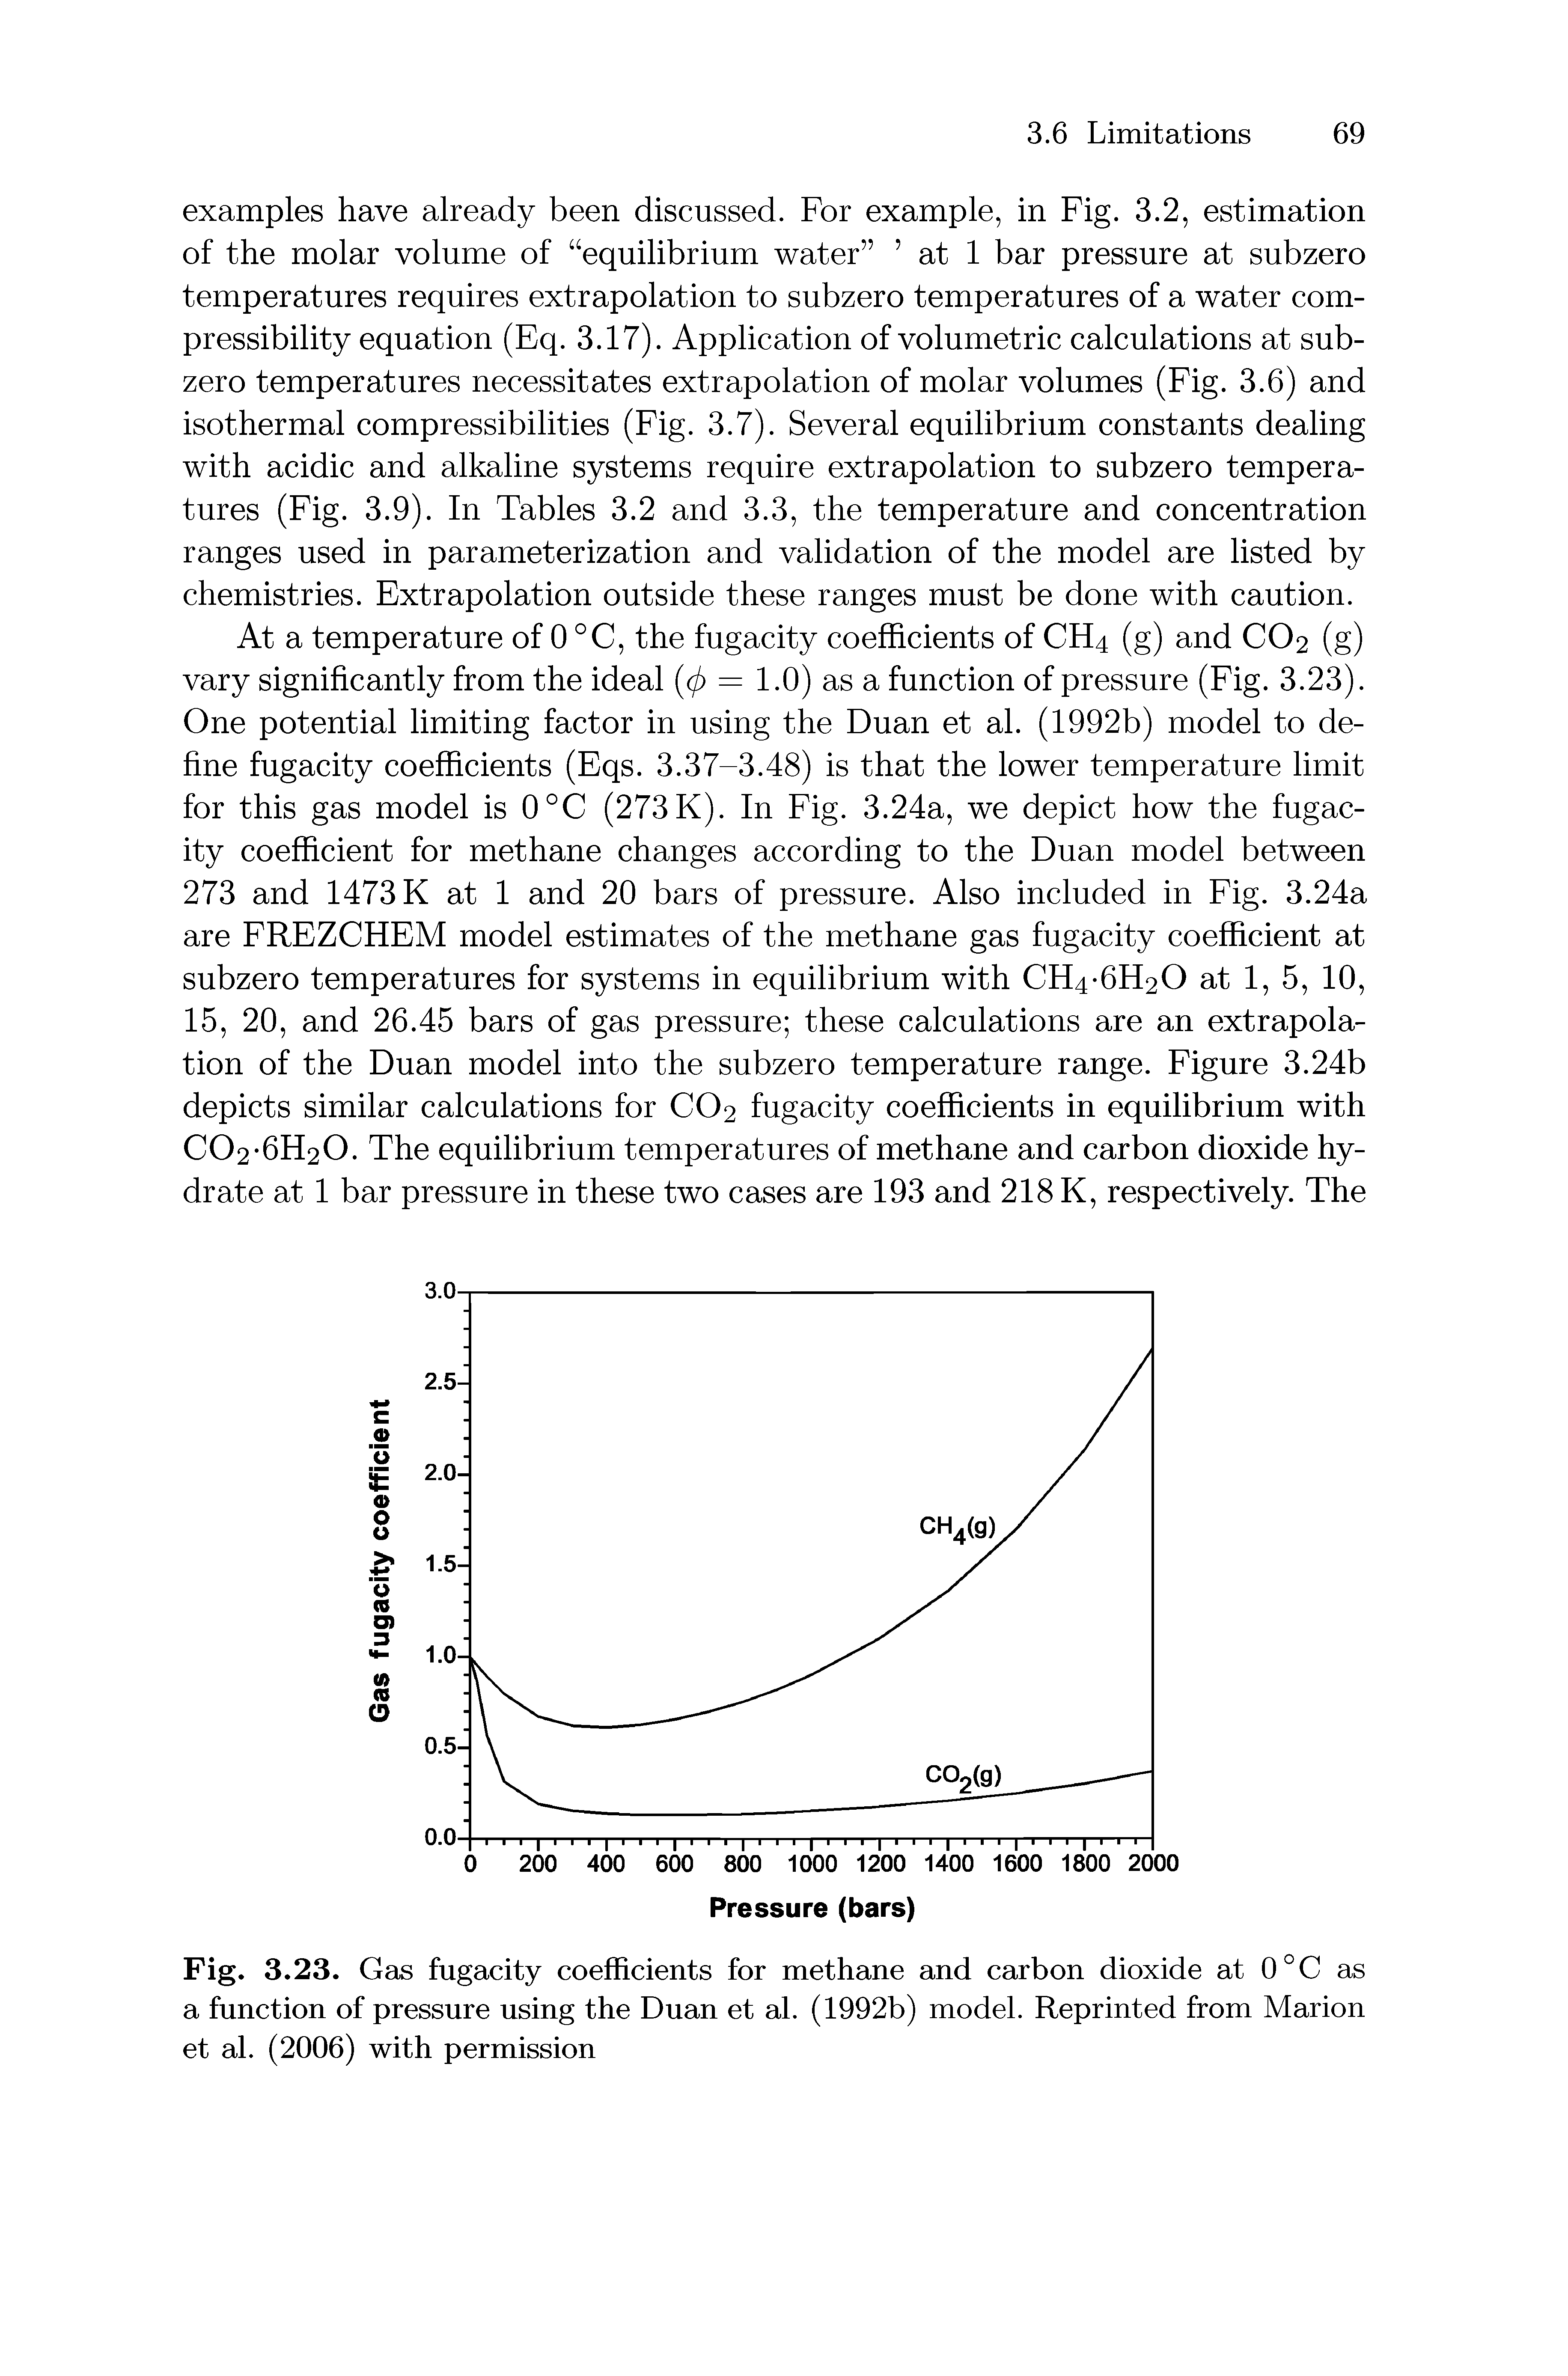 Fig. 3.23. Gas fugacity coefficients for methane and carbon dioxide at 0°C as a function of pressure using the Duan et al. (1992b) model. Reprinted from Marion et al. (2006) with permission...